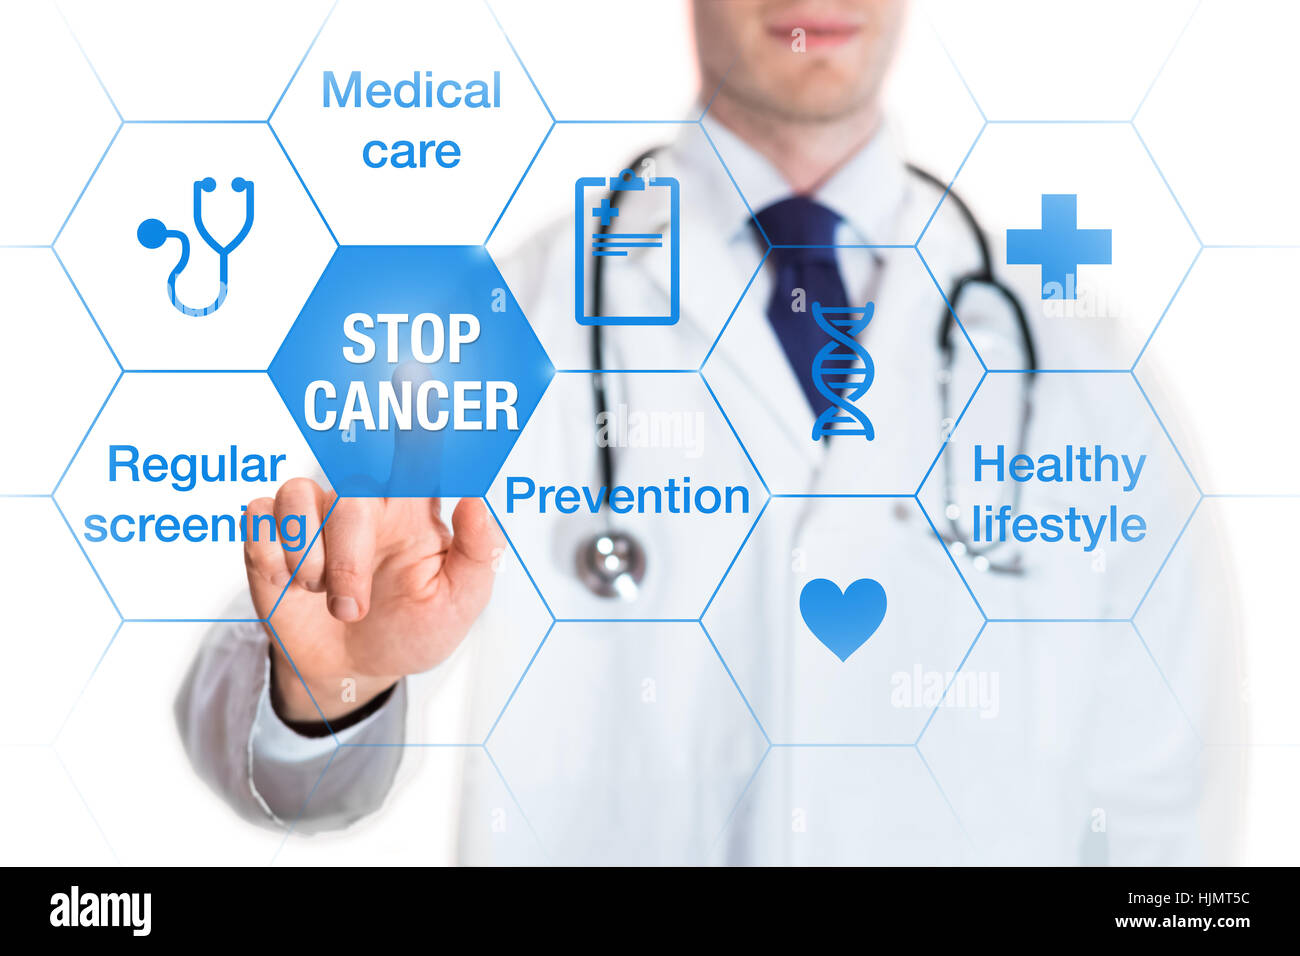 Cancer prevention and awareness concept with icons and words on screen and medical doctor touching a button Stock Photo